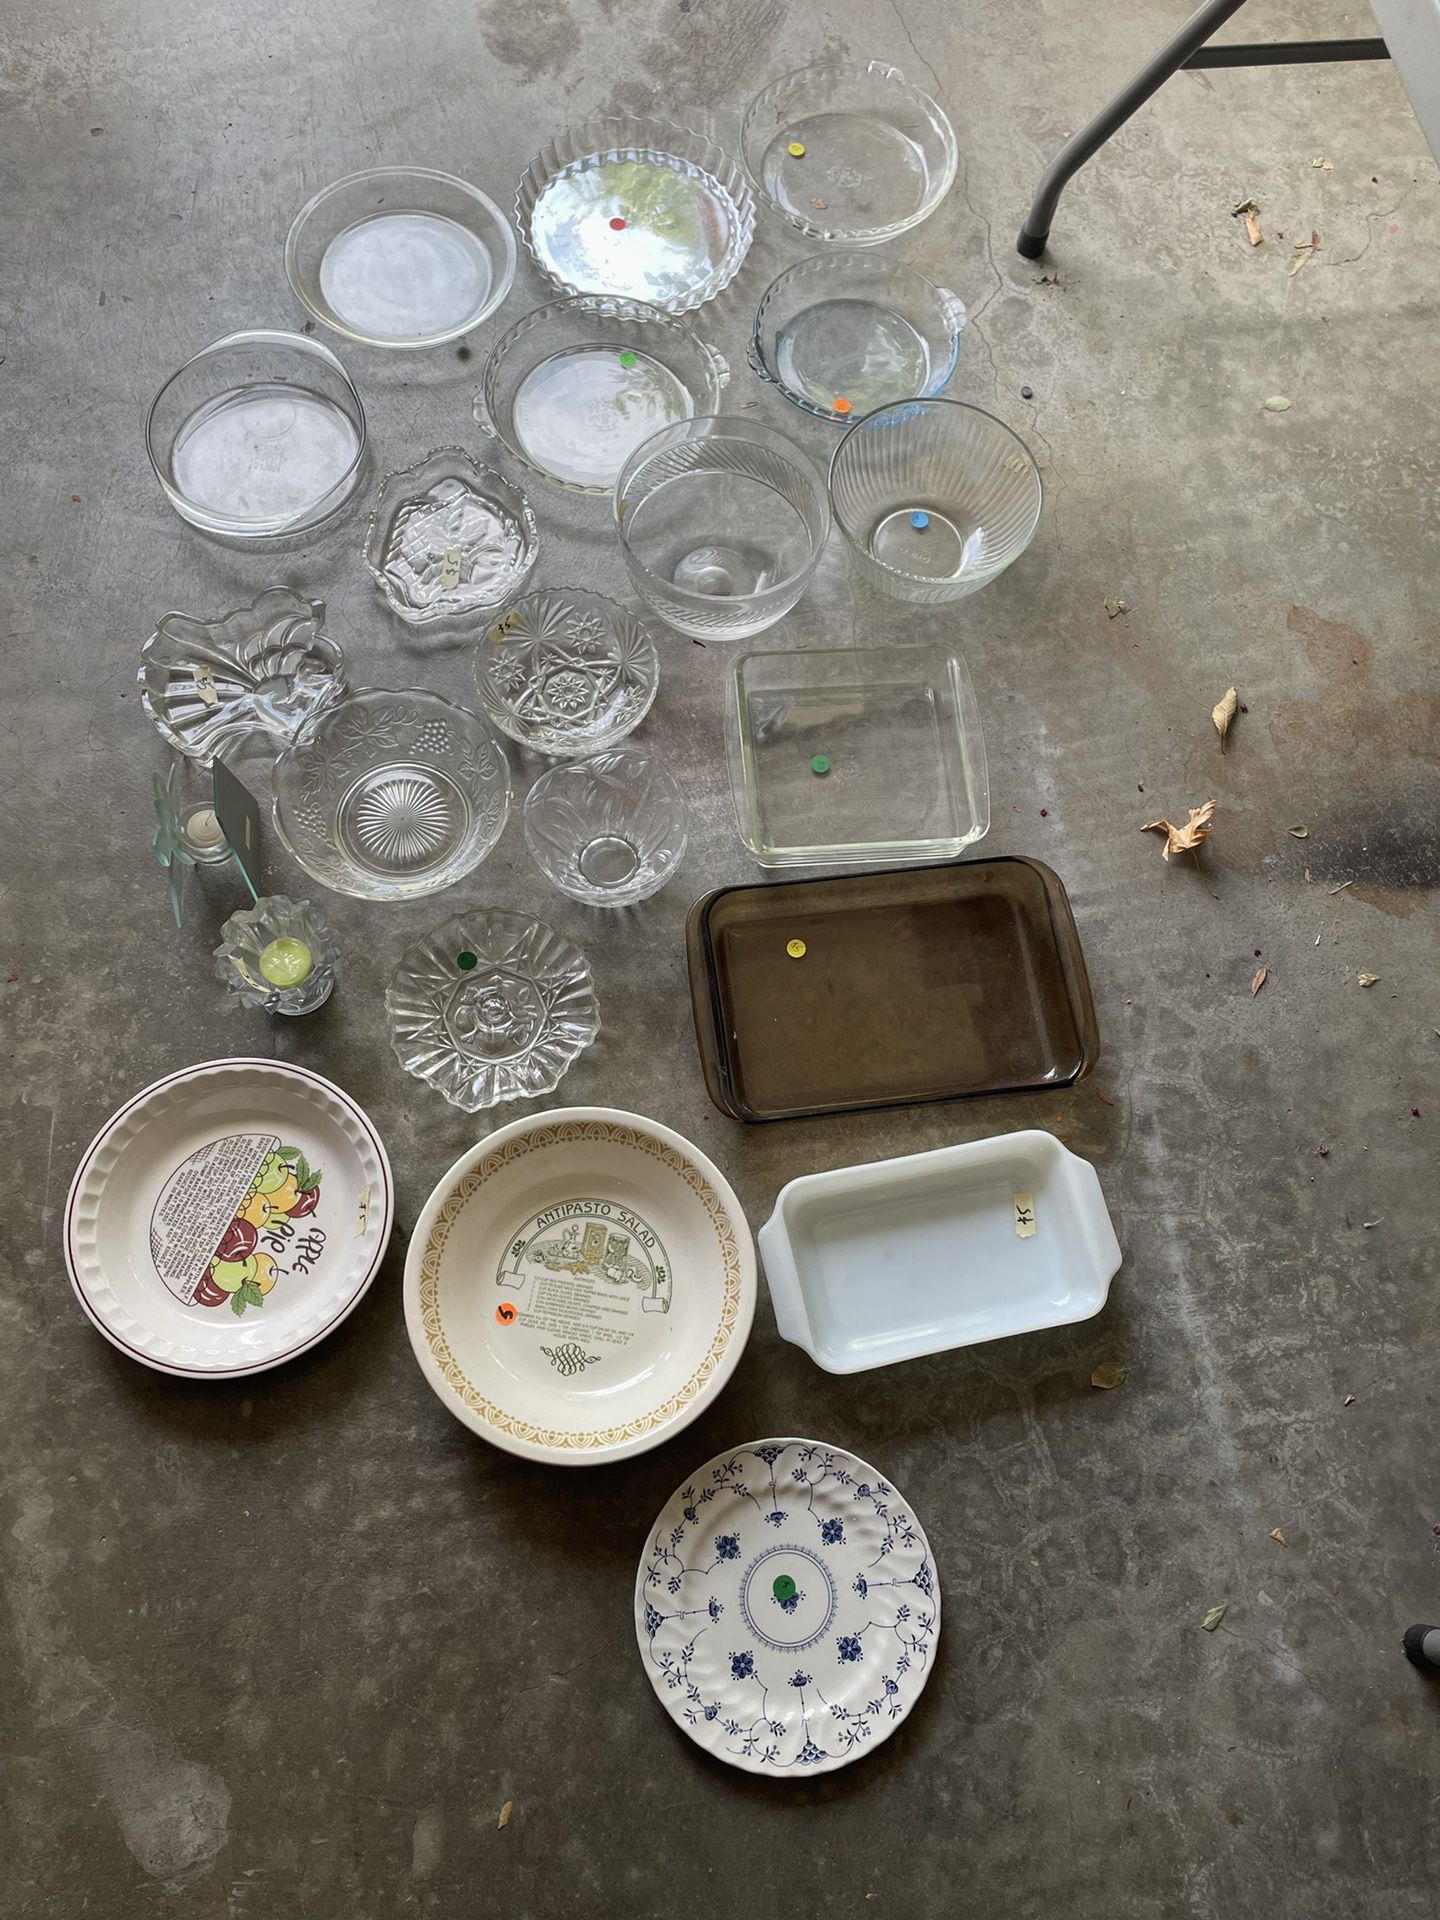 Assorted Pyrex, glass baking dishes, vintage bowls, pie plates, trinkets ~ $5 each